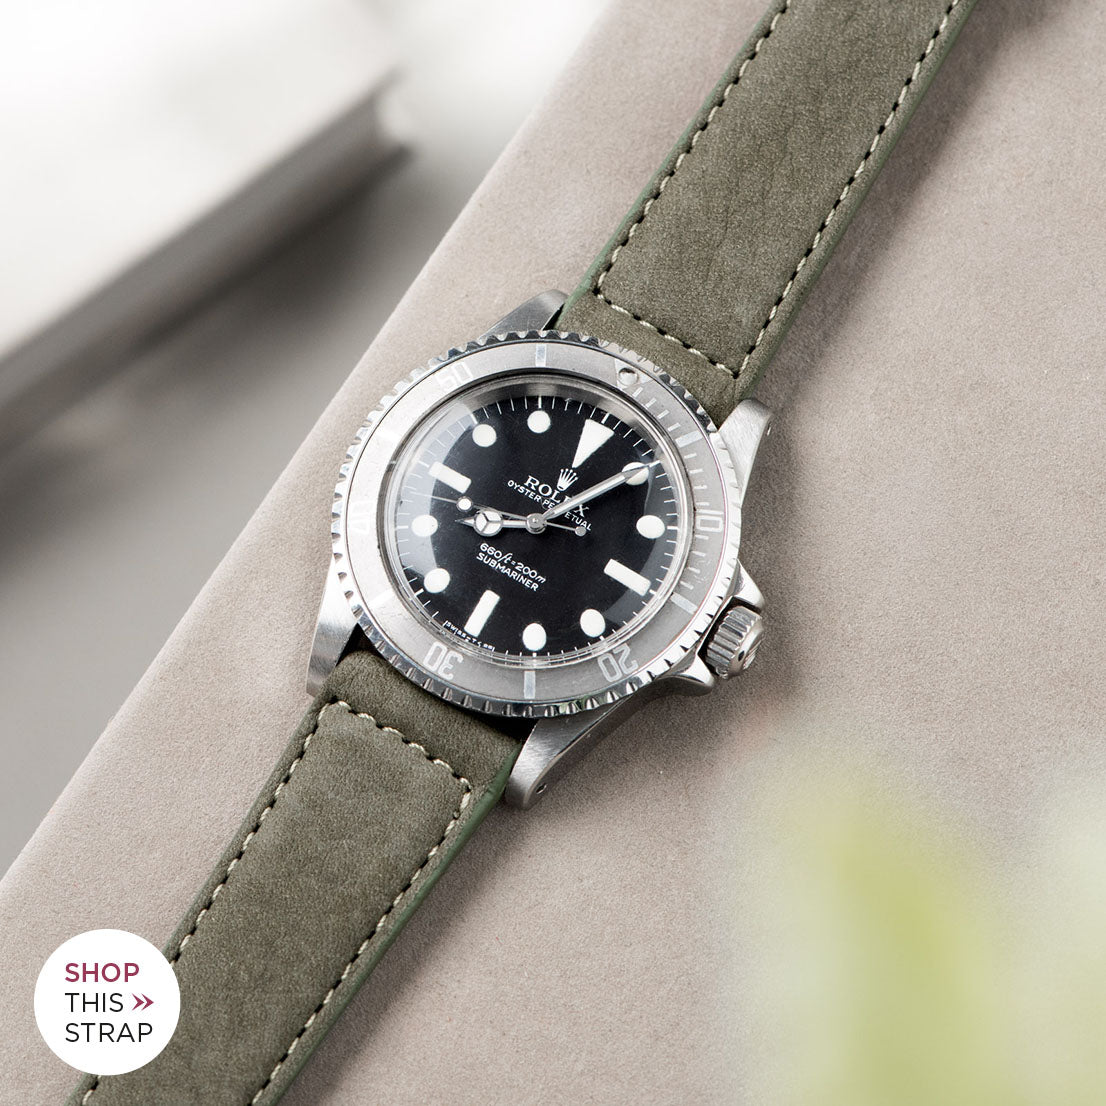 Bulang and Sons_Strap Guide_The Rolex 5513 Faded Maxi Submariner_Olive Grey Nubuck Leather Watch Strap